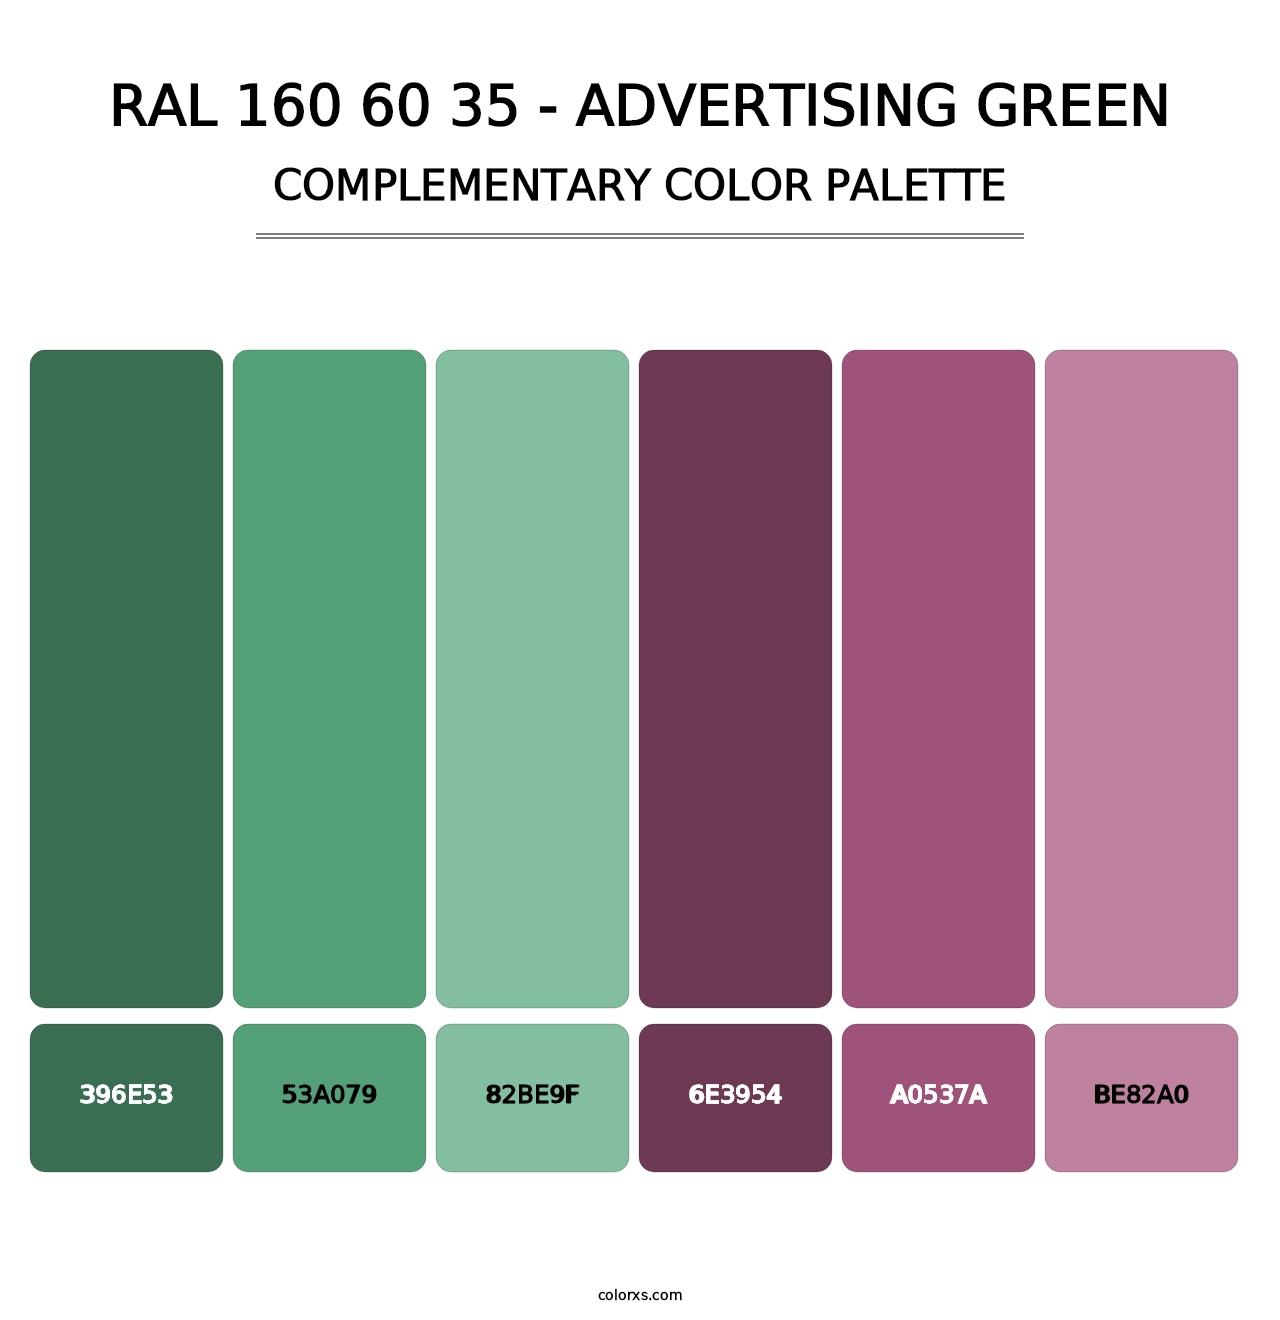 RAL 160 60 35 - Advertising Green - Complementary Color Palette